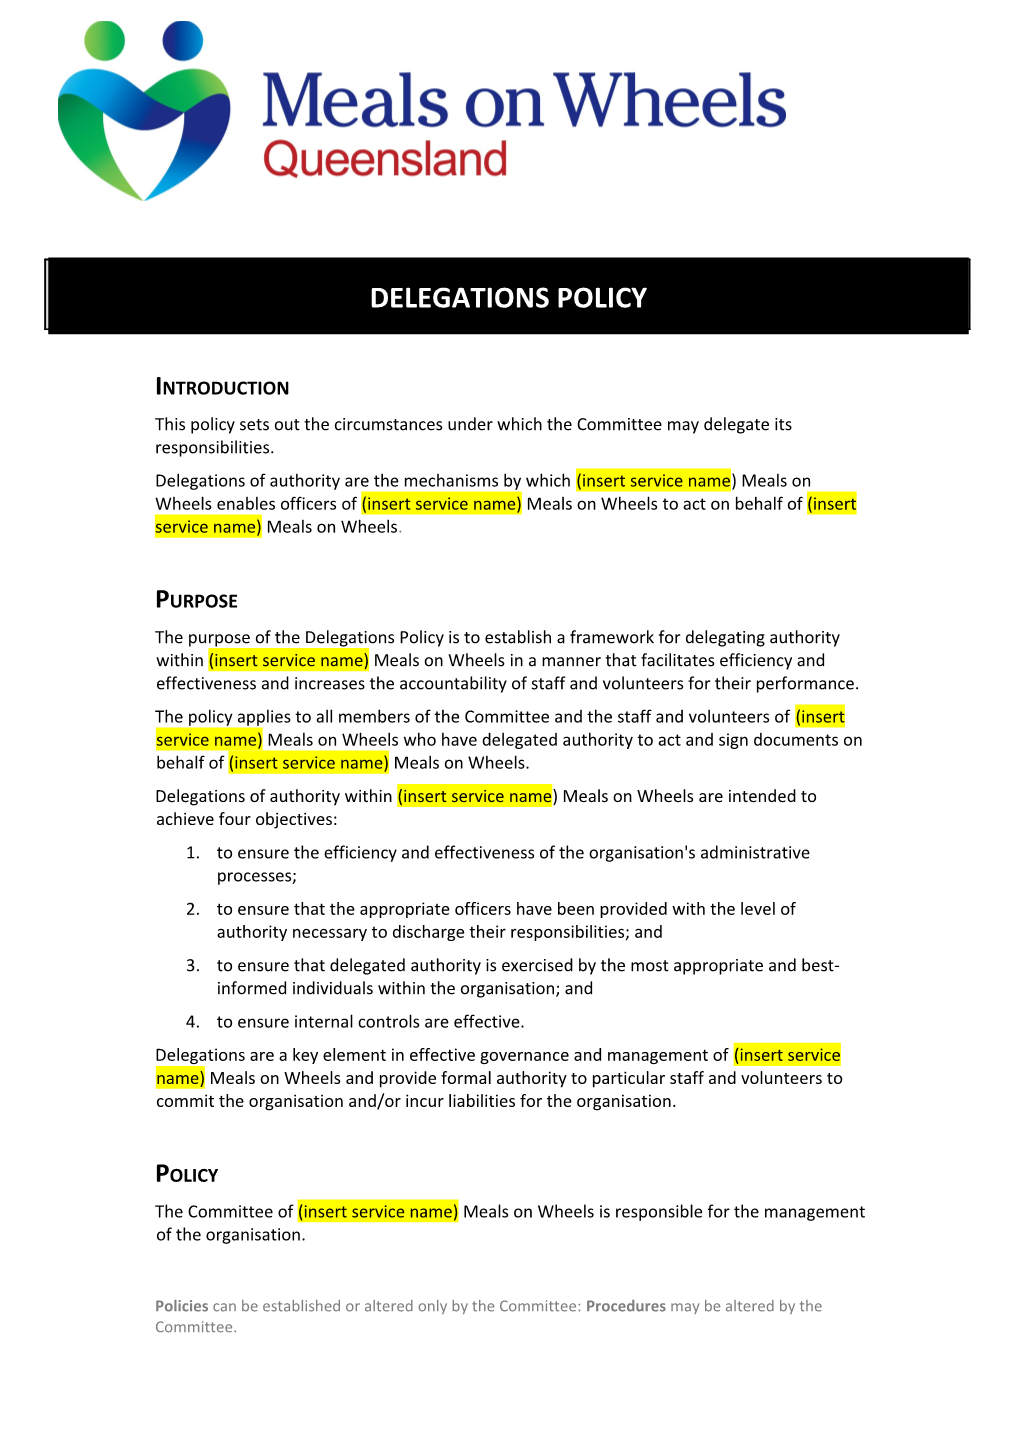 This Policy Sets out the Circumstances Under Which the Committee May Delegate Its